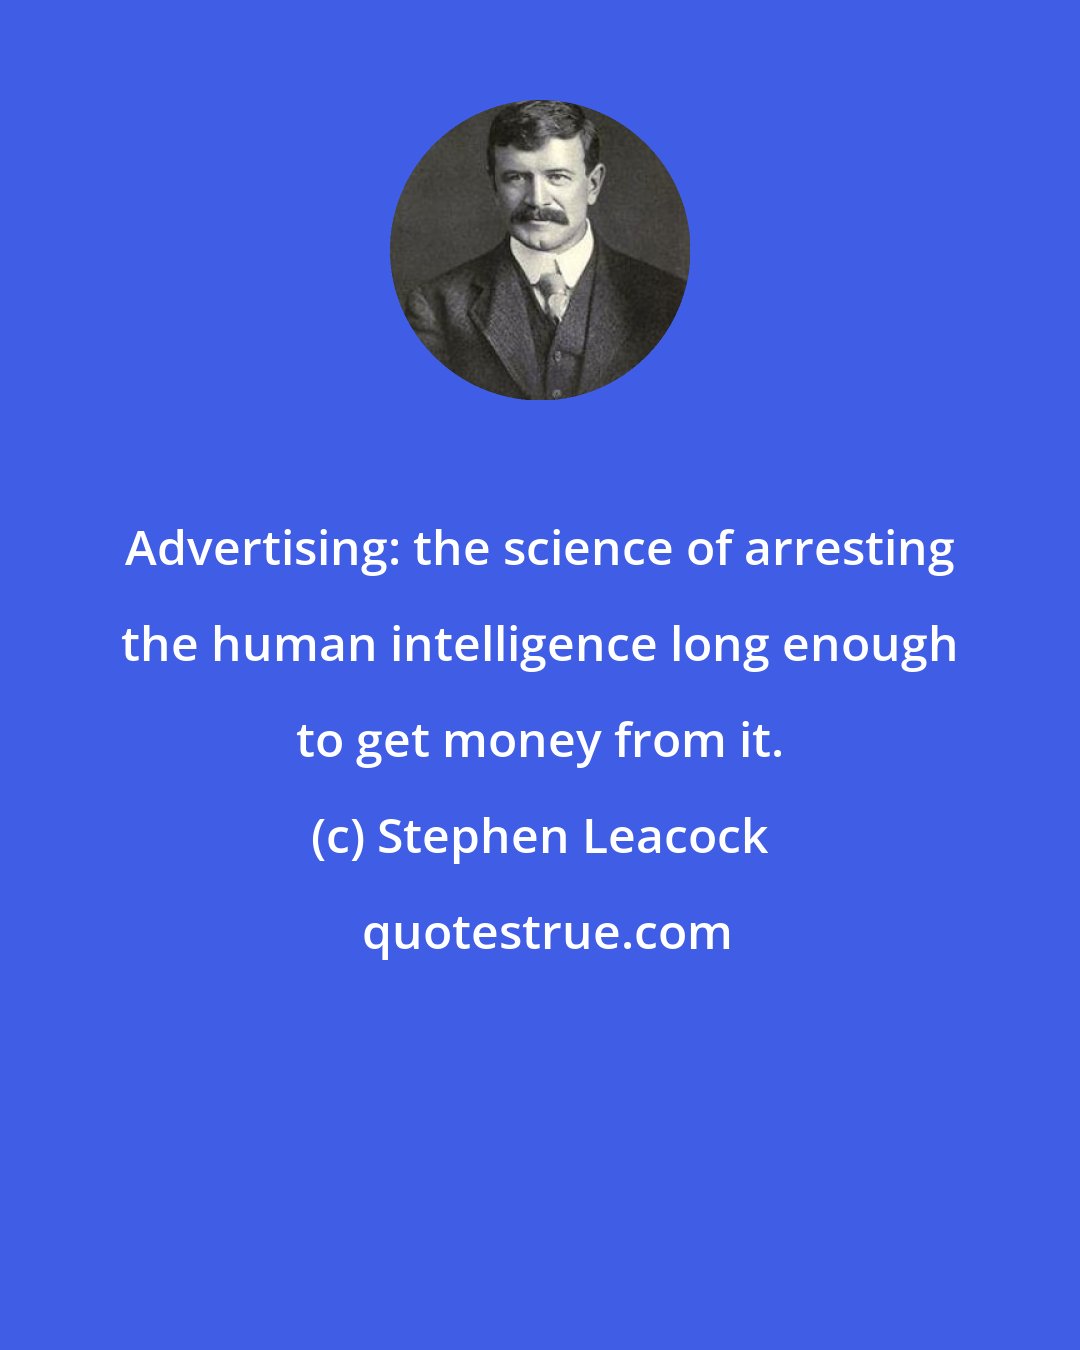 Stephen Leacock: Advertising: the science of arresting the human intelligence long enough to get money from it.